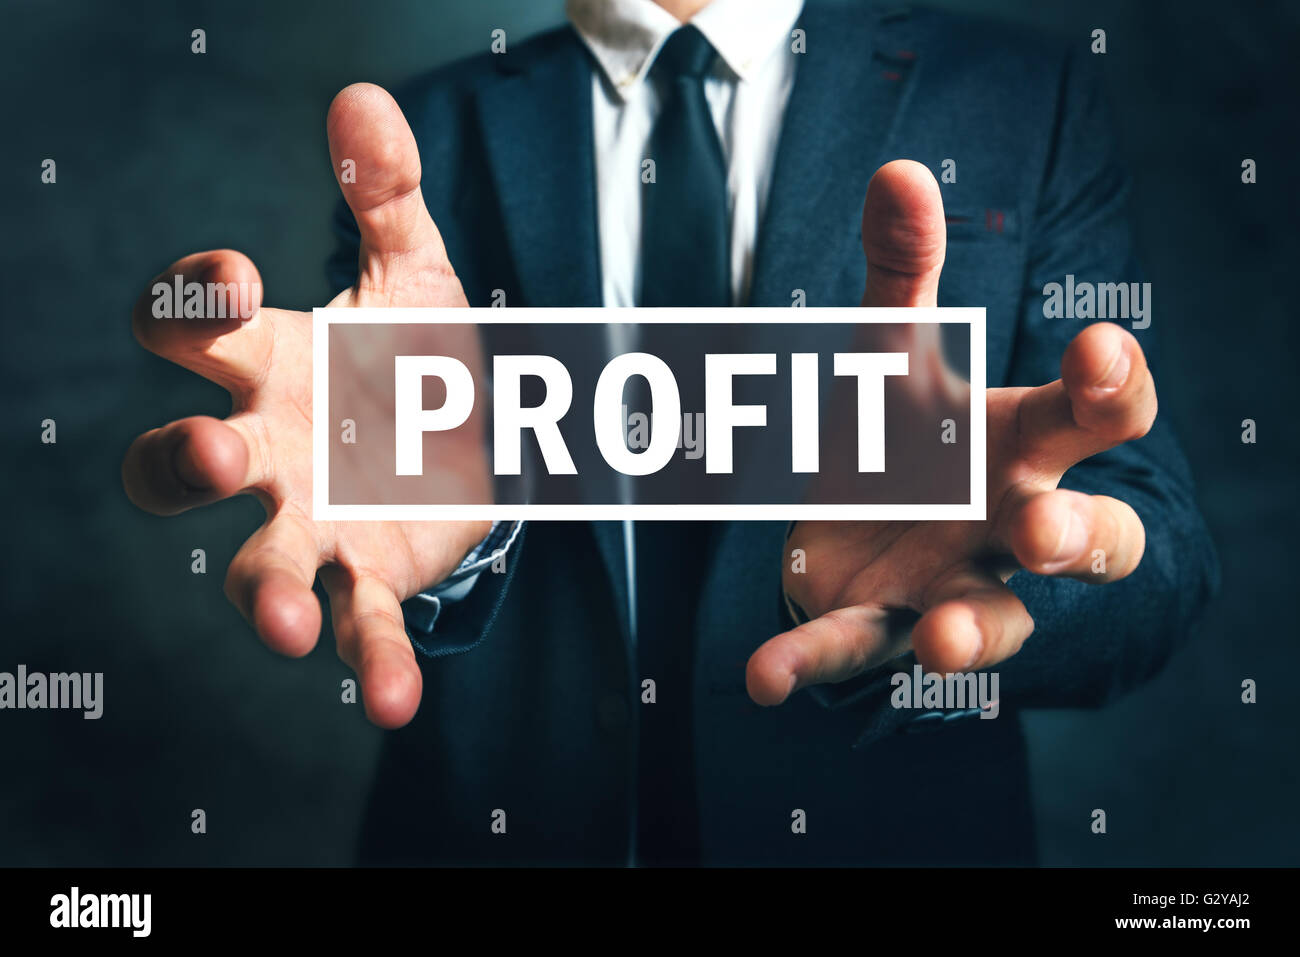 Concept of gaining business profit, businessman grabbing profit with his hands Stock Photo